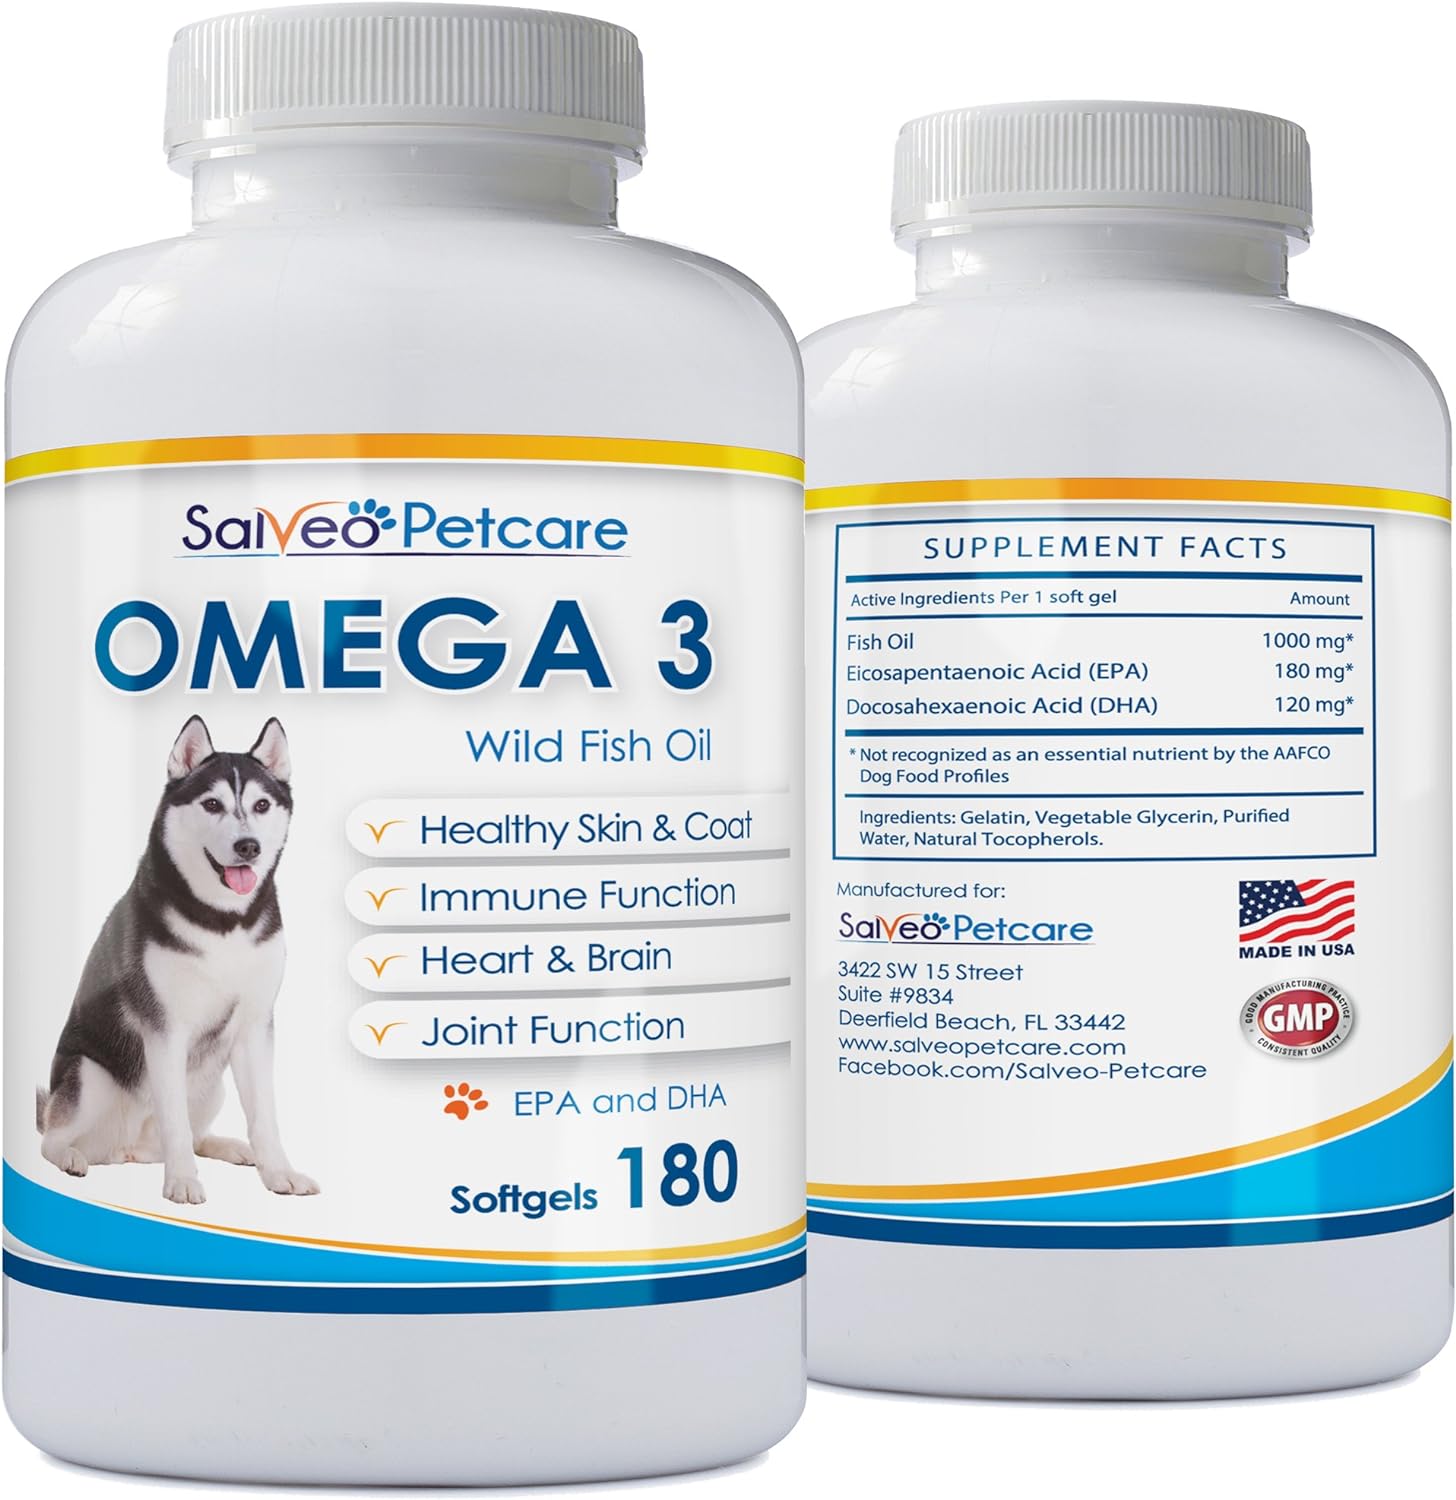 Omega 3 Fish Oil for Dogs - Natural Pet Supplement for Shiny Coat - Wild Caught More EPA & DHA Than Salmon Oil - 180 Capsules No Fishy Smell or Mess - Ideal for Medium Large Dogs : Pet Supplies